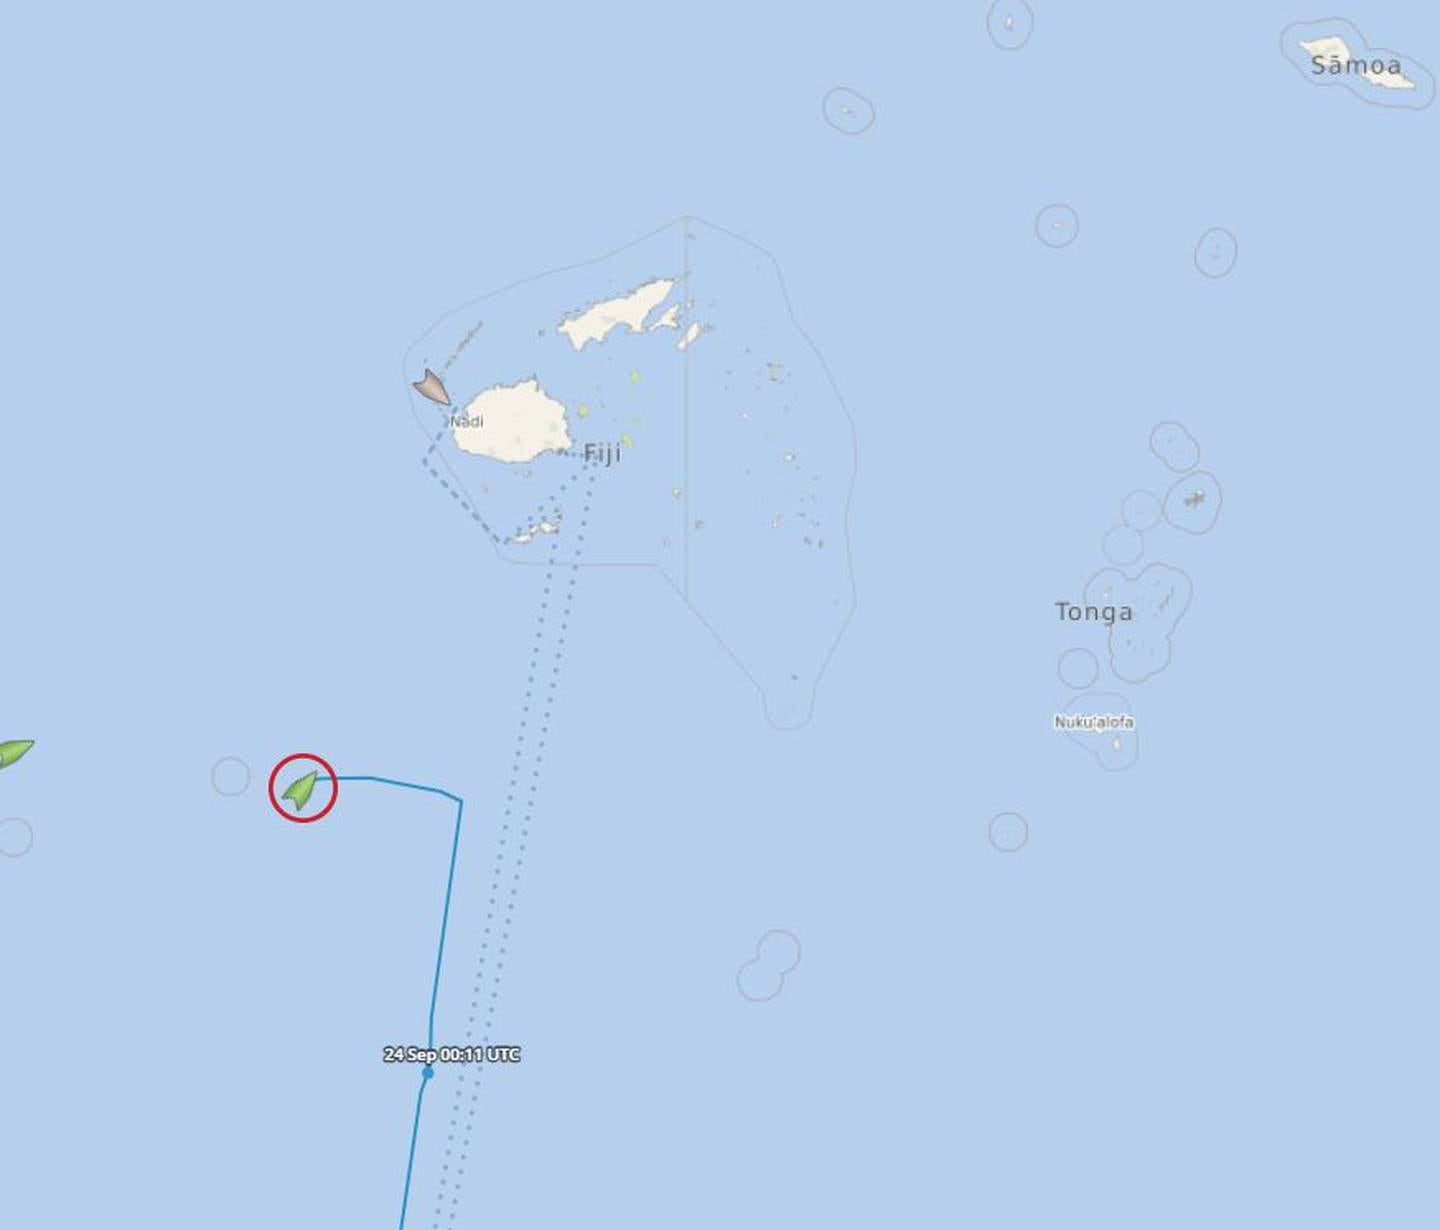 The Pacific Explorer diverted to a distress call at around 1am on Monday morning. Photo / Shiptracker.com